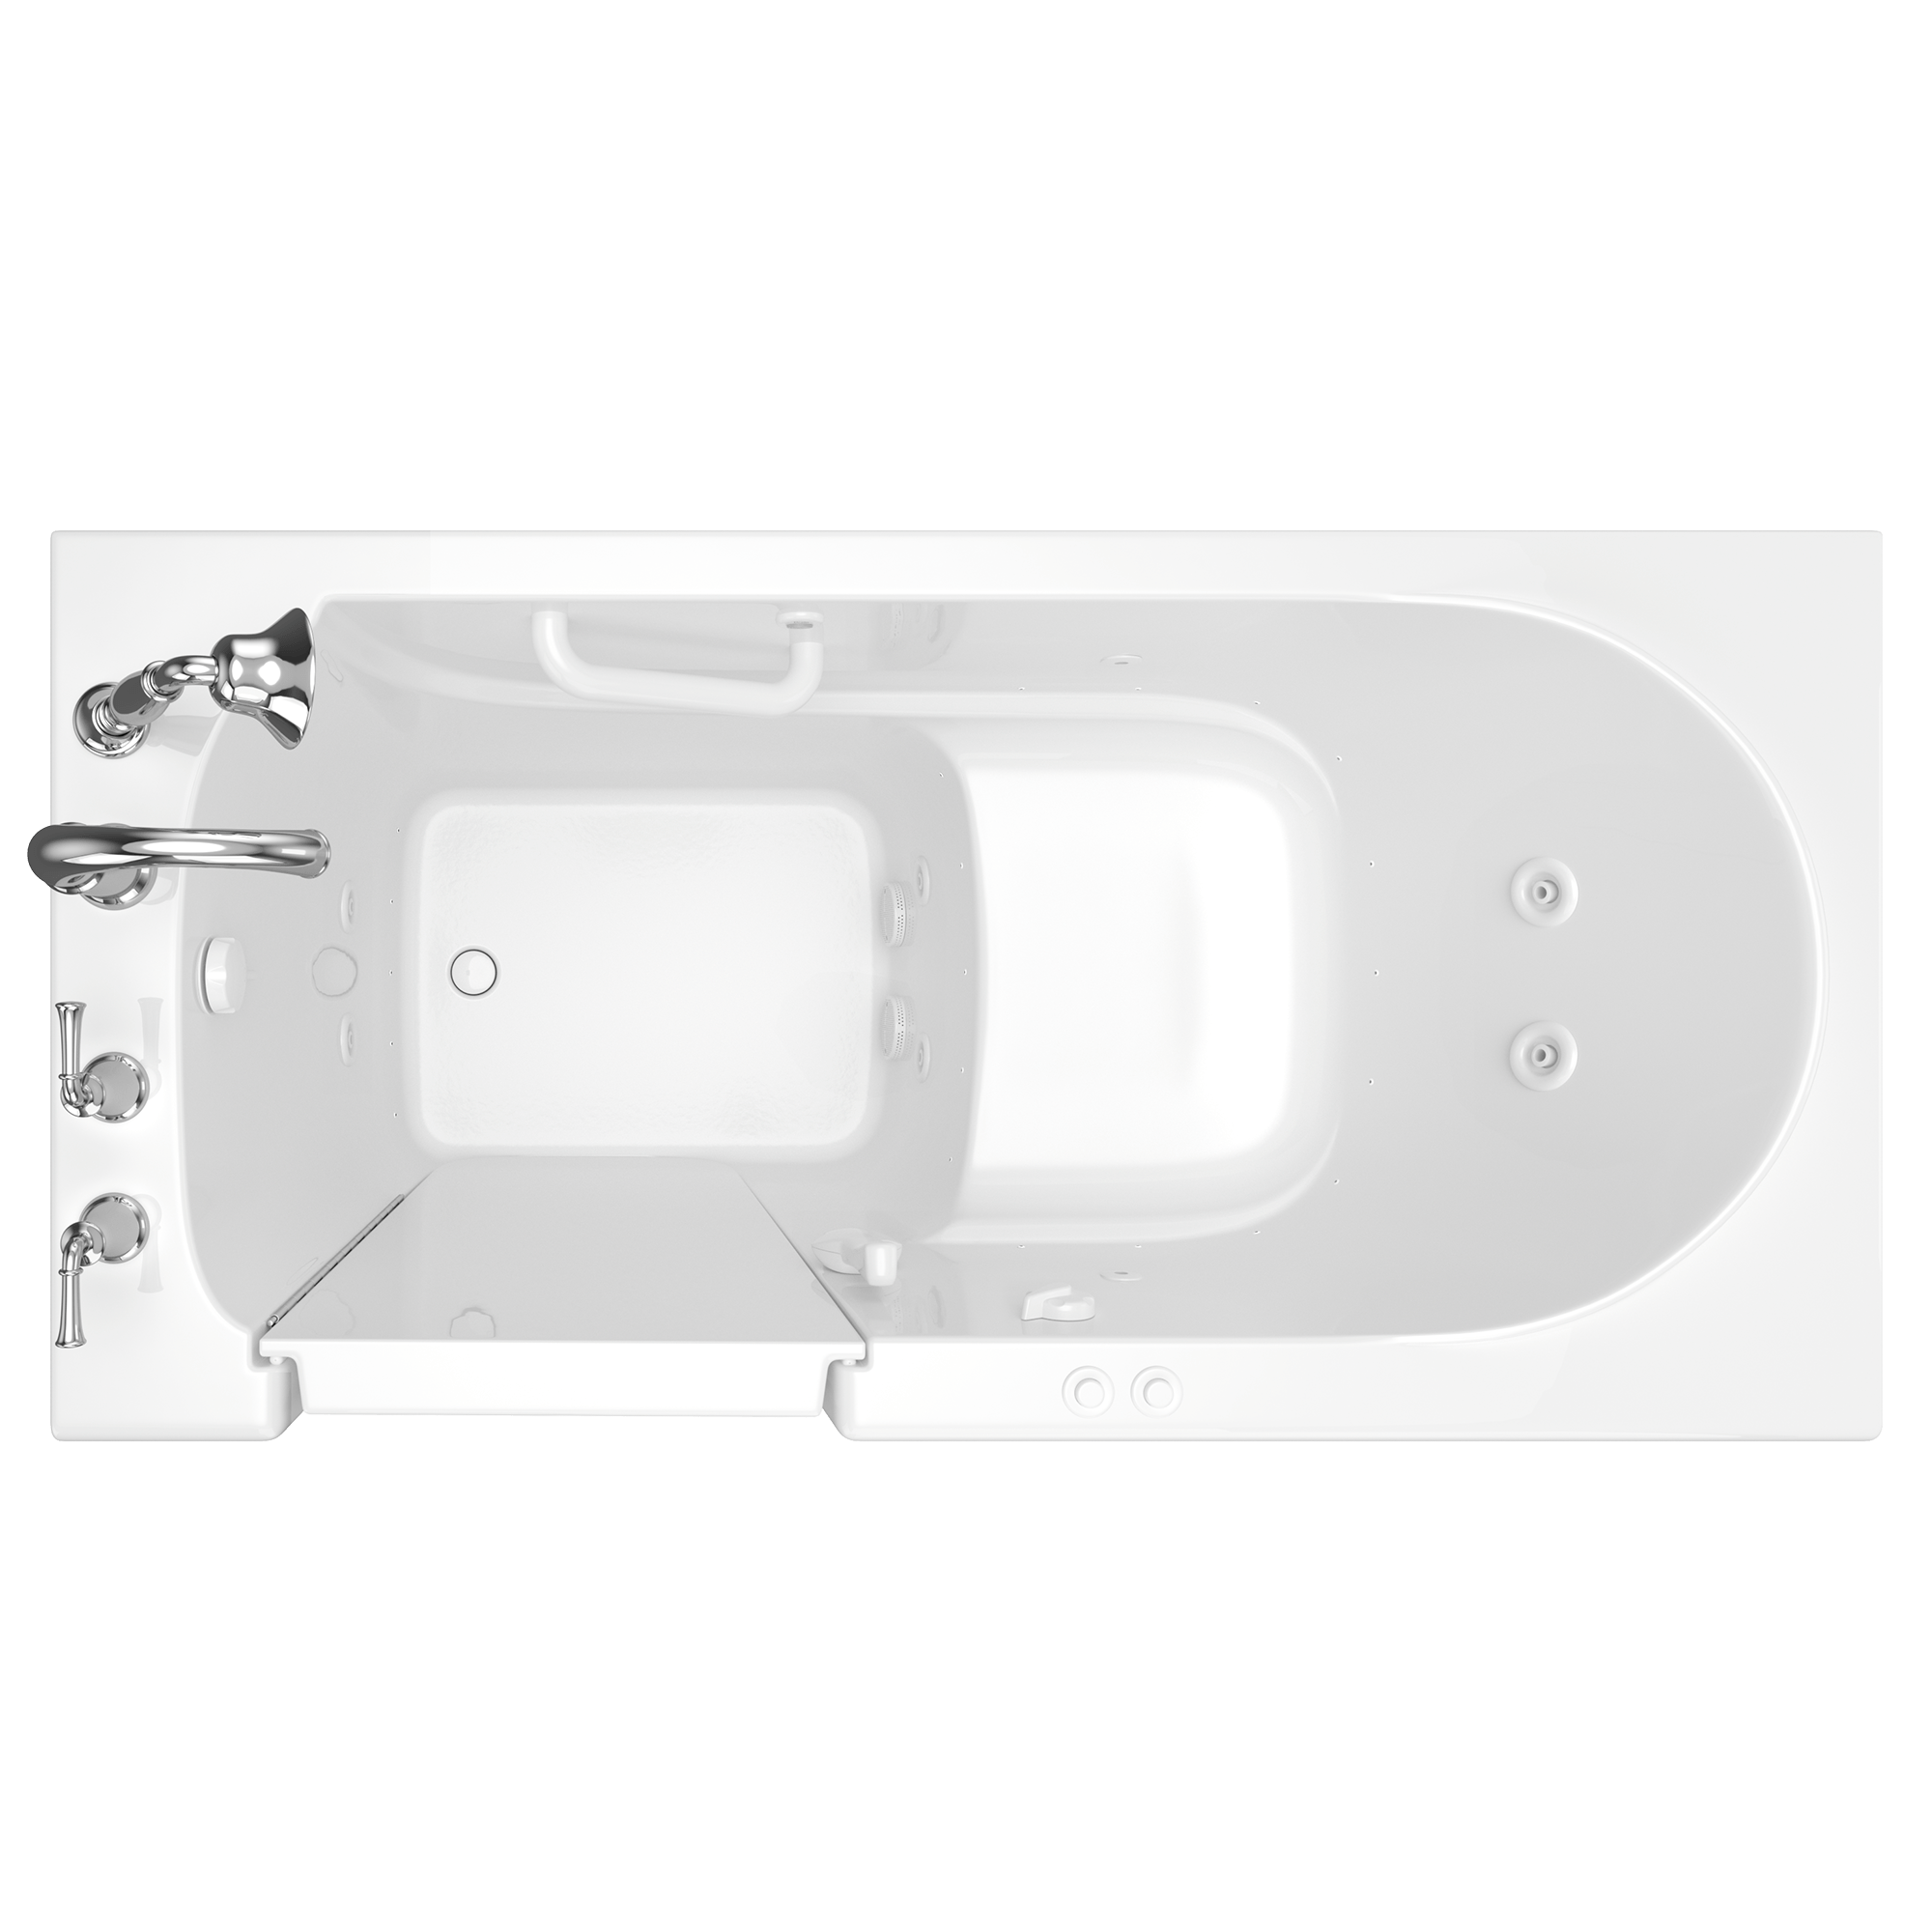 Gelcoat Value Series 30 x 60  Inch Walk in Tub With Combination Air Spa and Whirlpool Systems   Left Hand Drain With Faucet WIB WHITE